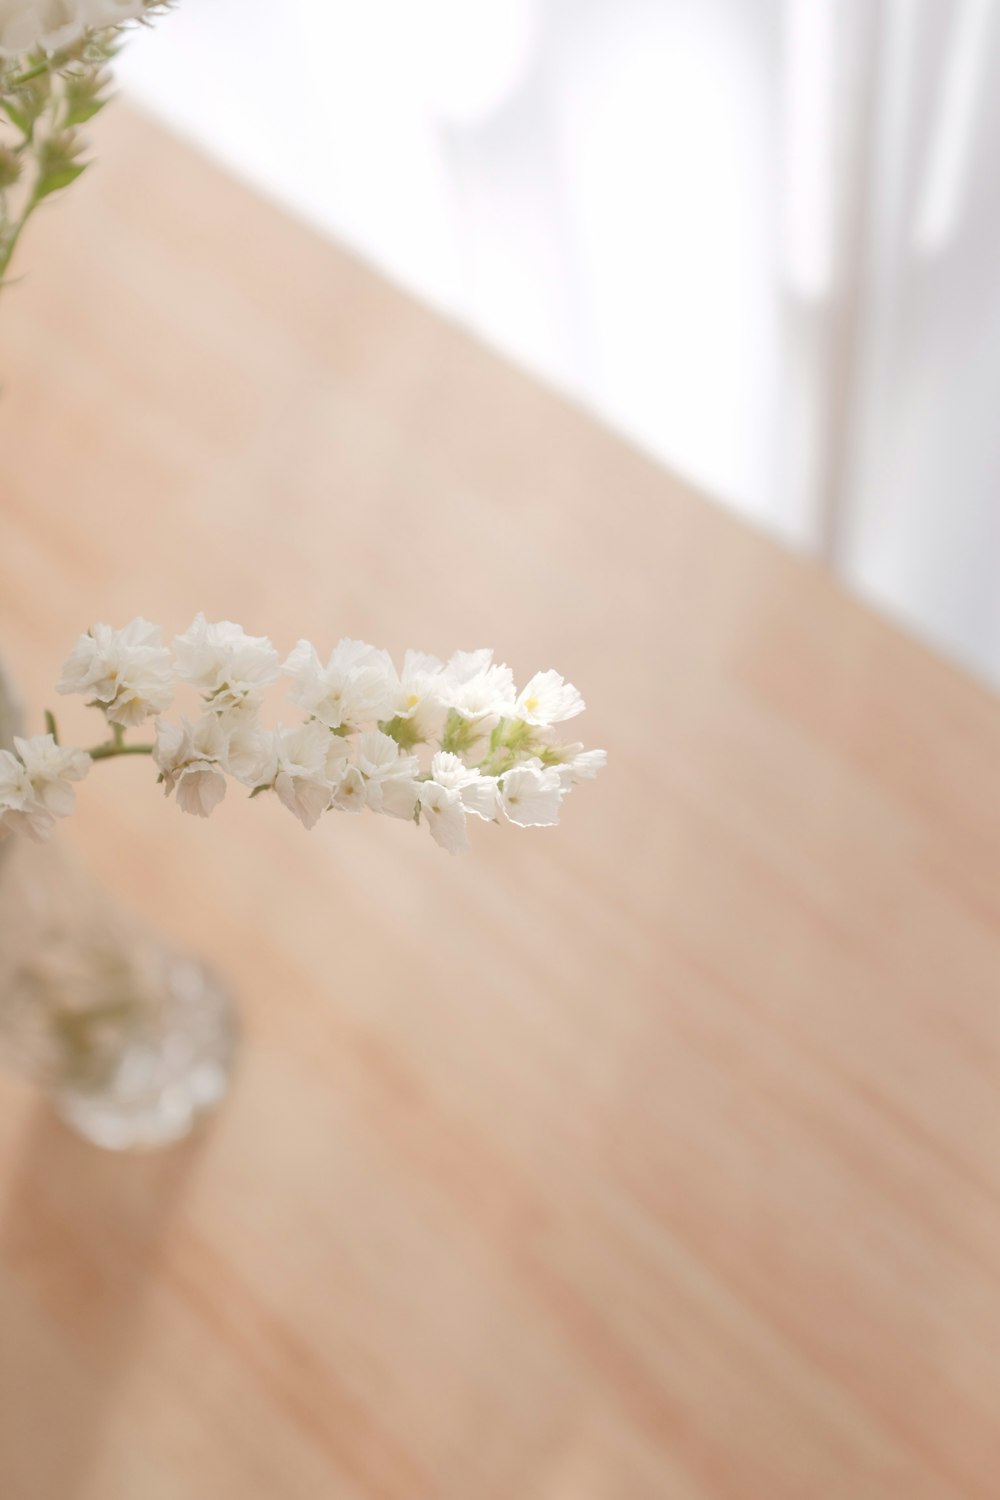 white flower on brown wooden table